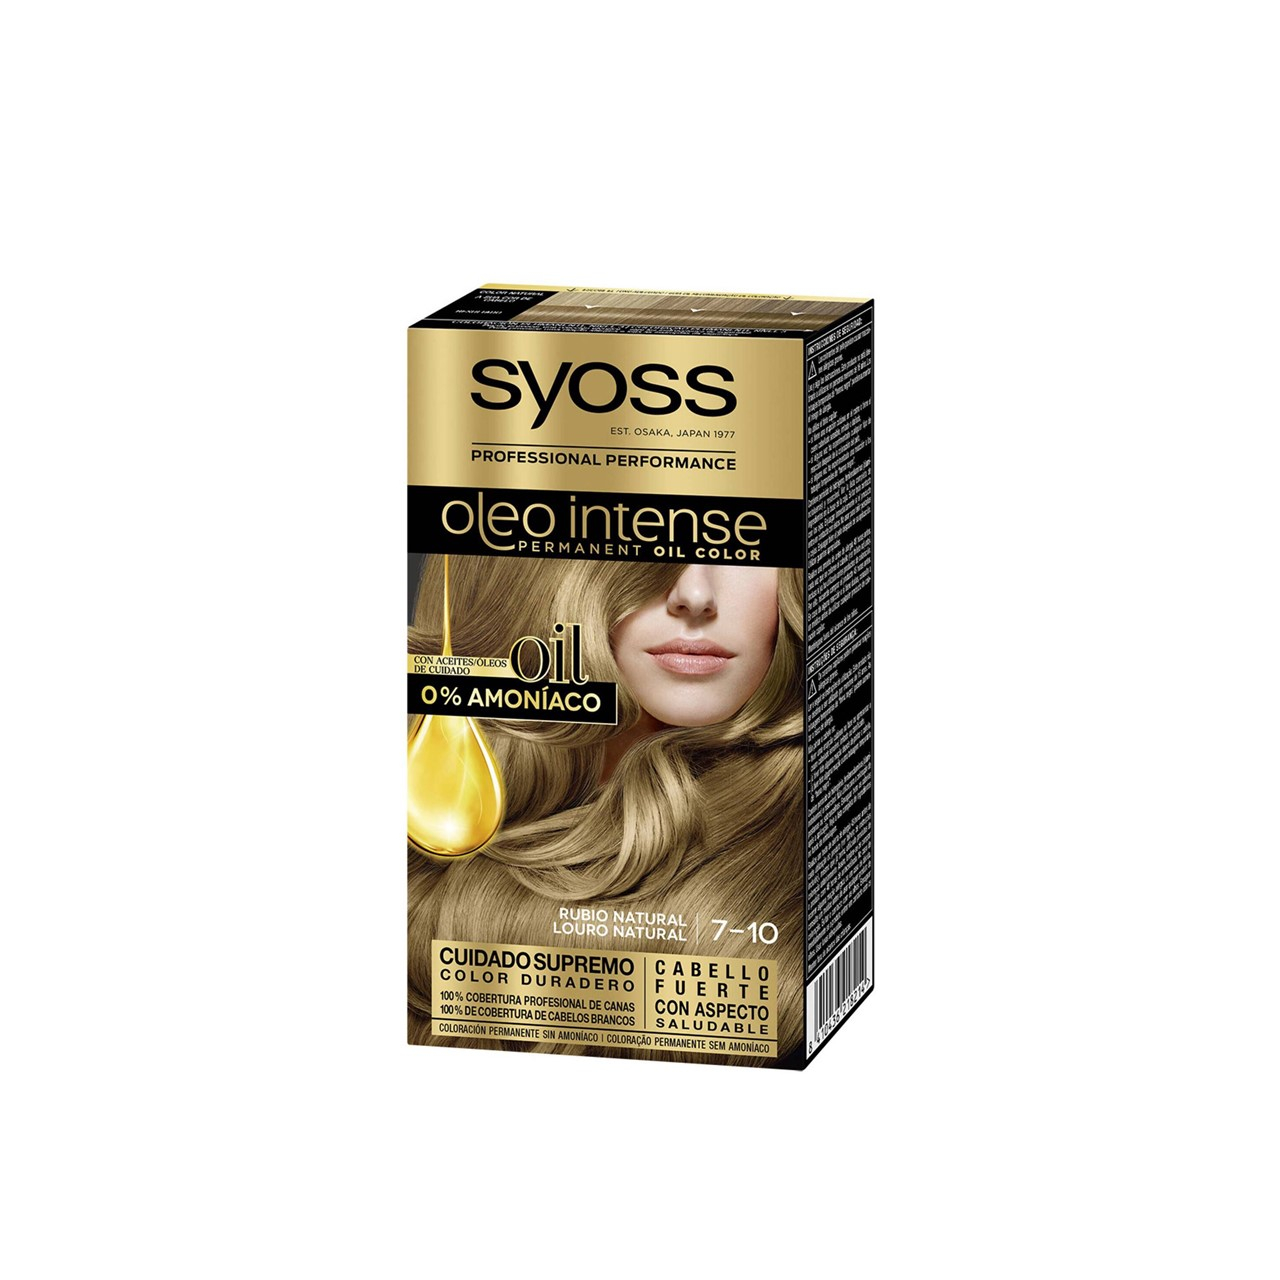 Syoss Oleo Intense Permanent Oil Color 7-10 Natural Blonde Permanent Hair Dye